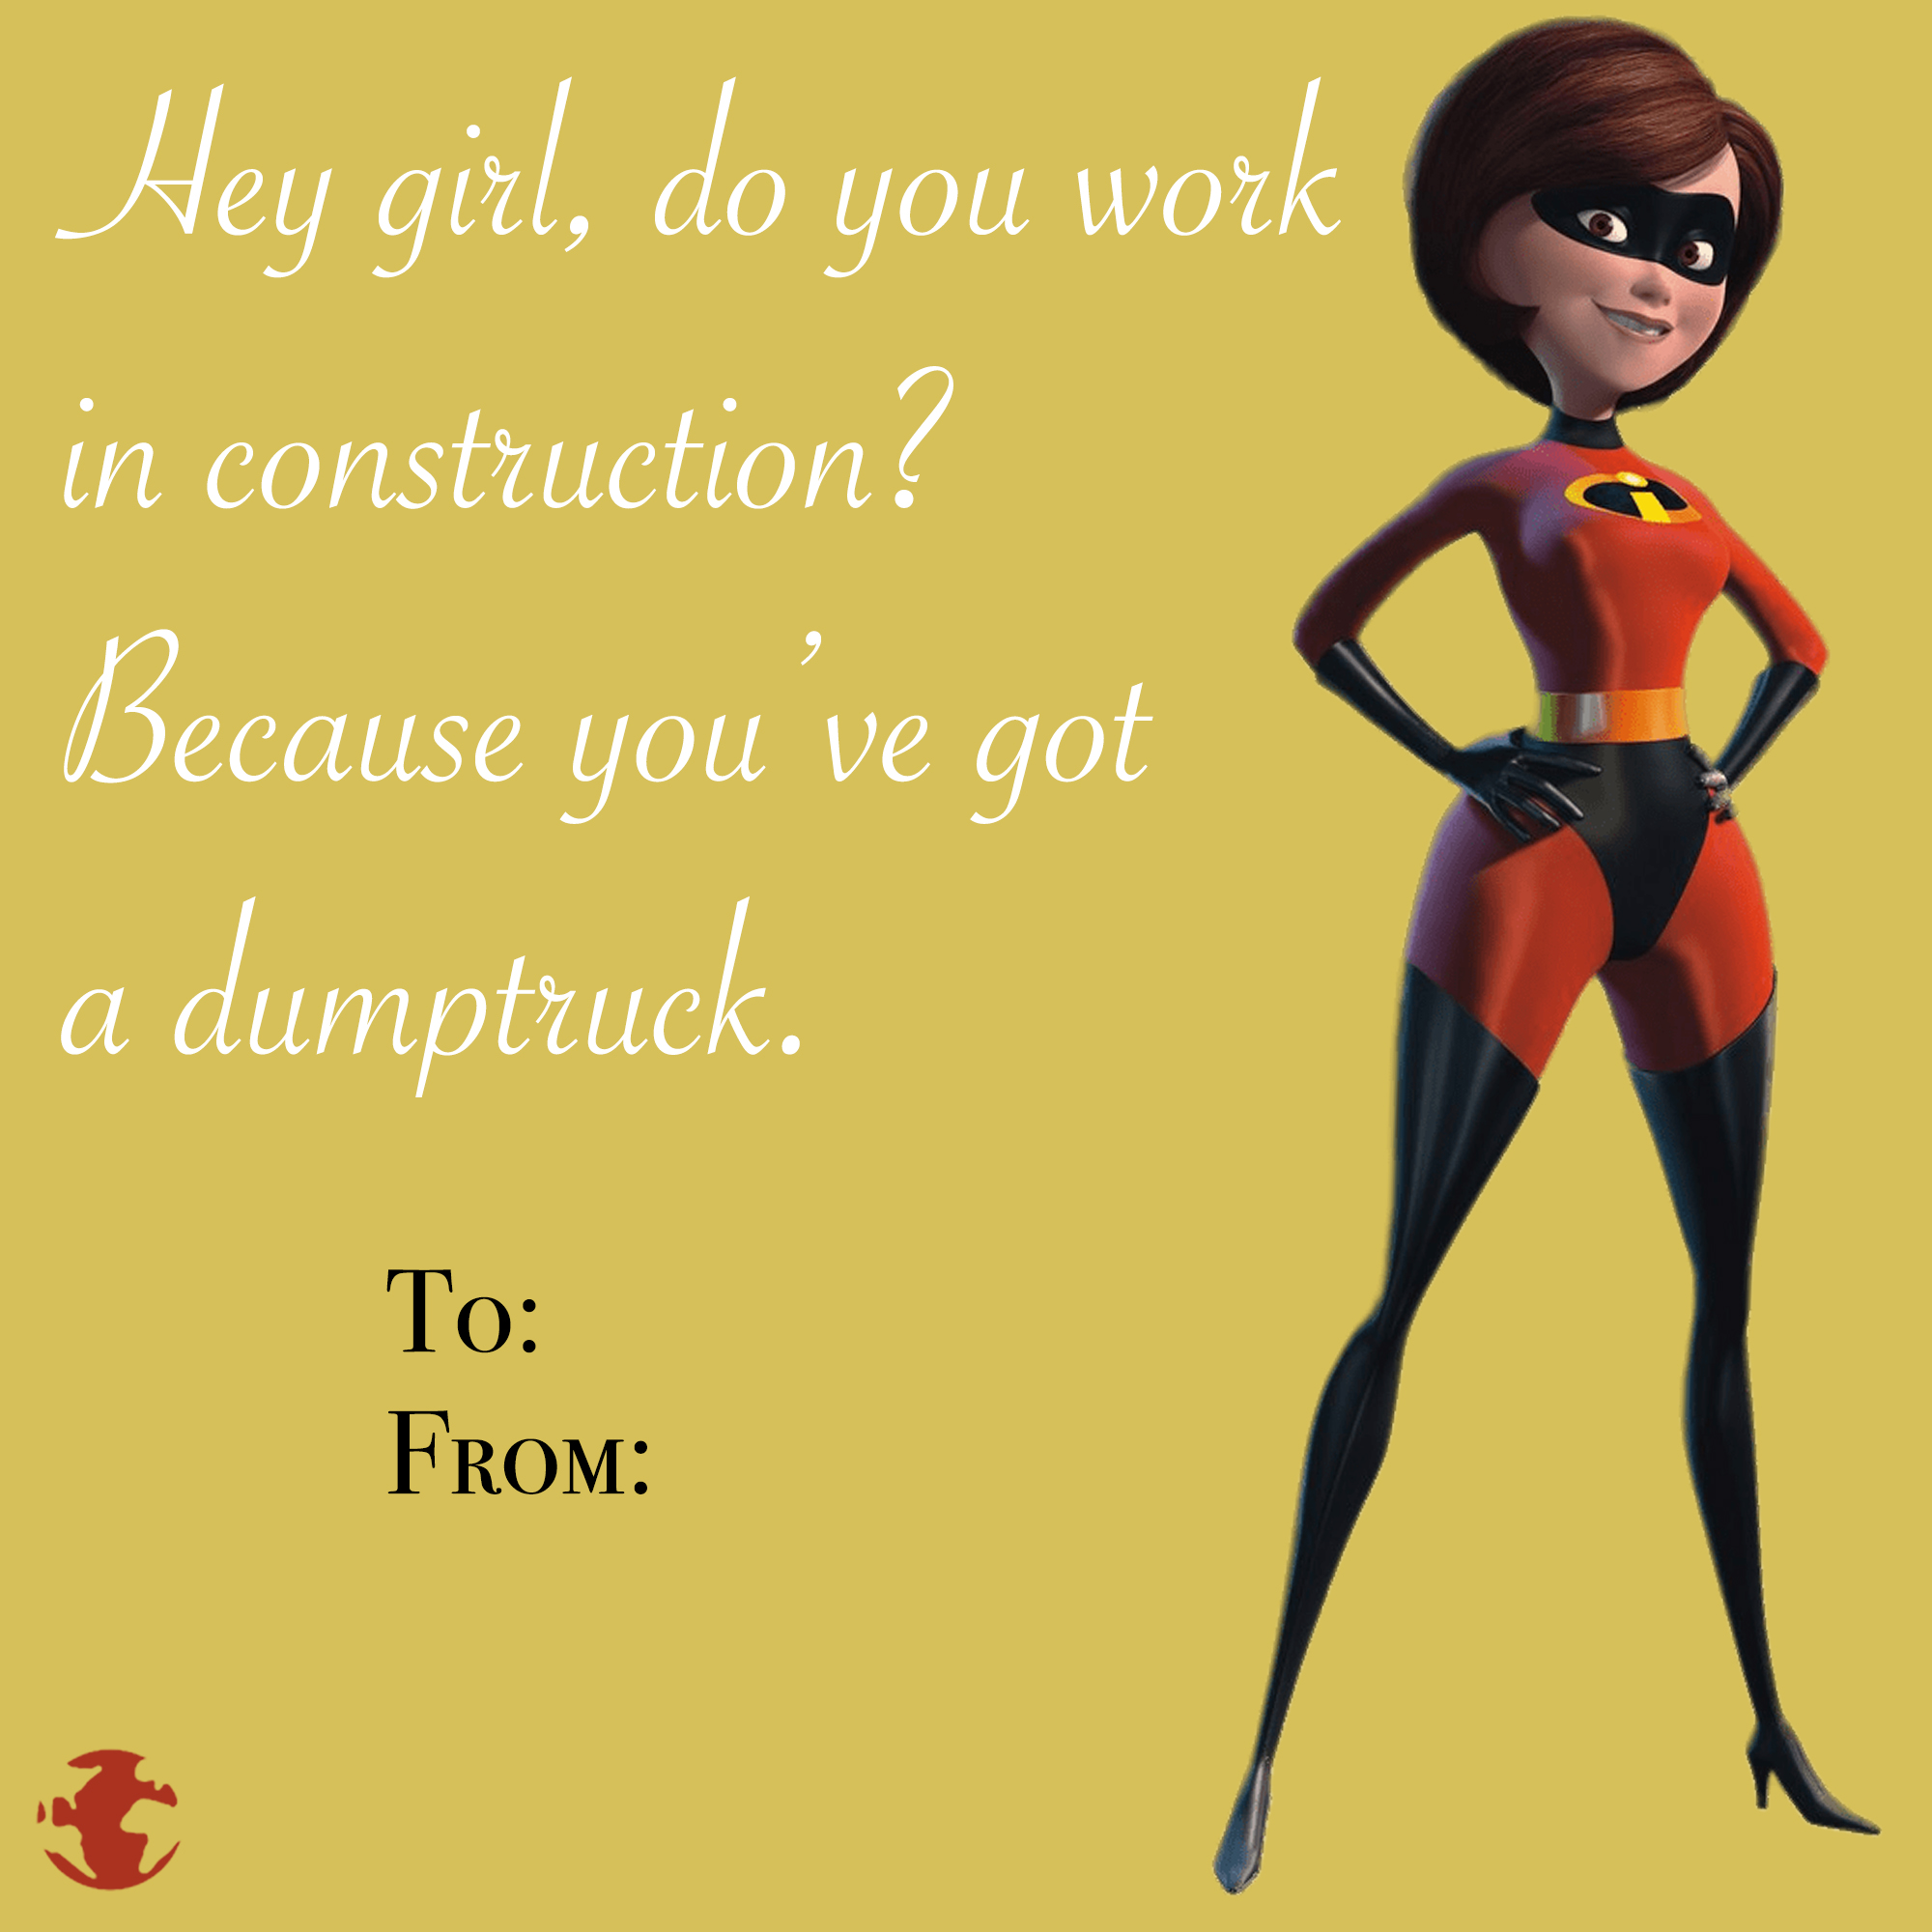 eBaum's Valentine's Day Cards 2022 - incredibles elastigirl costume - Hey girl, do you work in construction? Because you've got dumptruck. To From 3